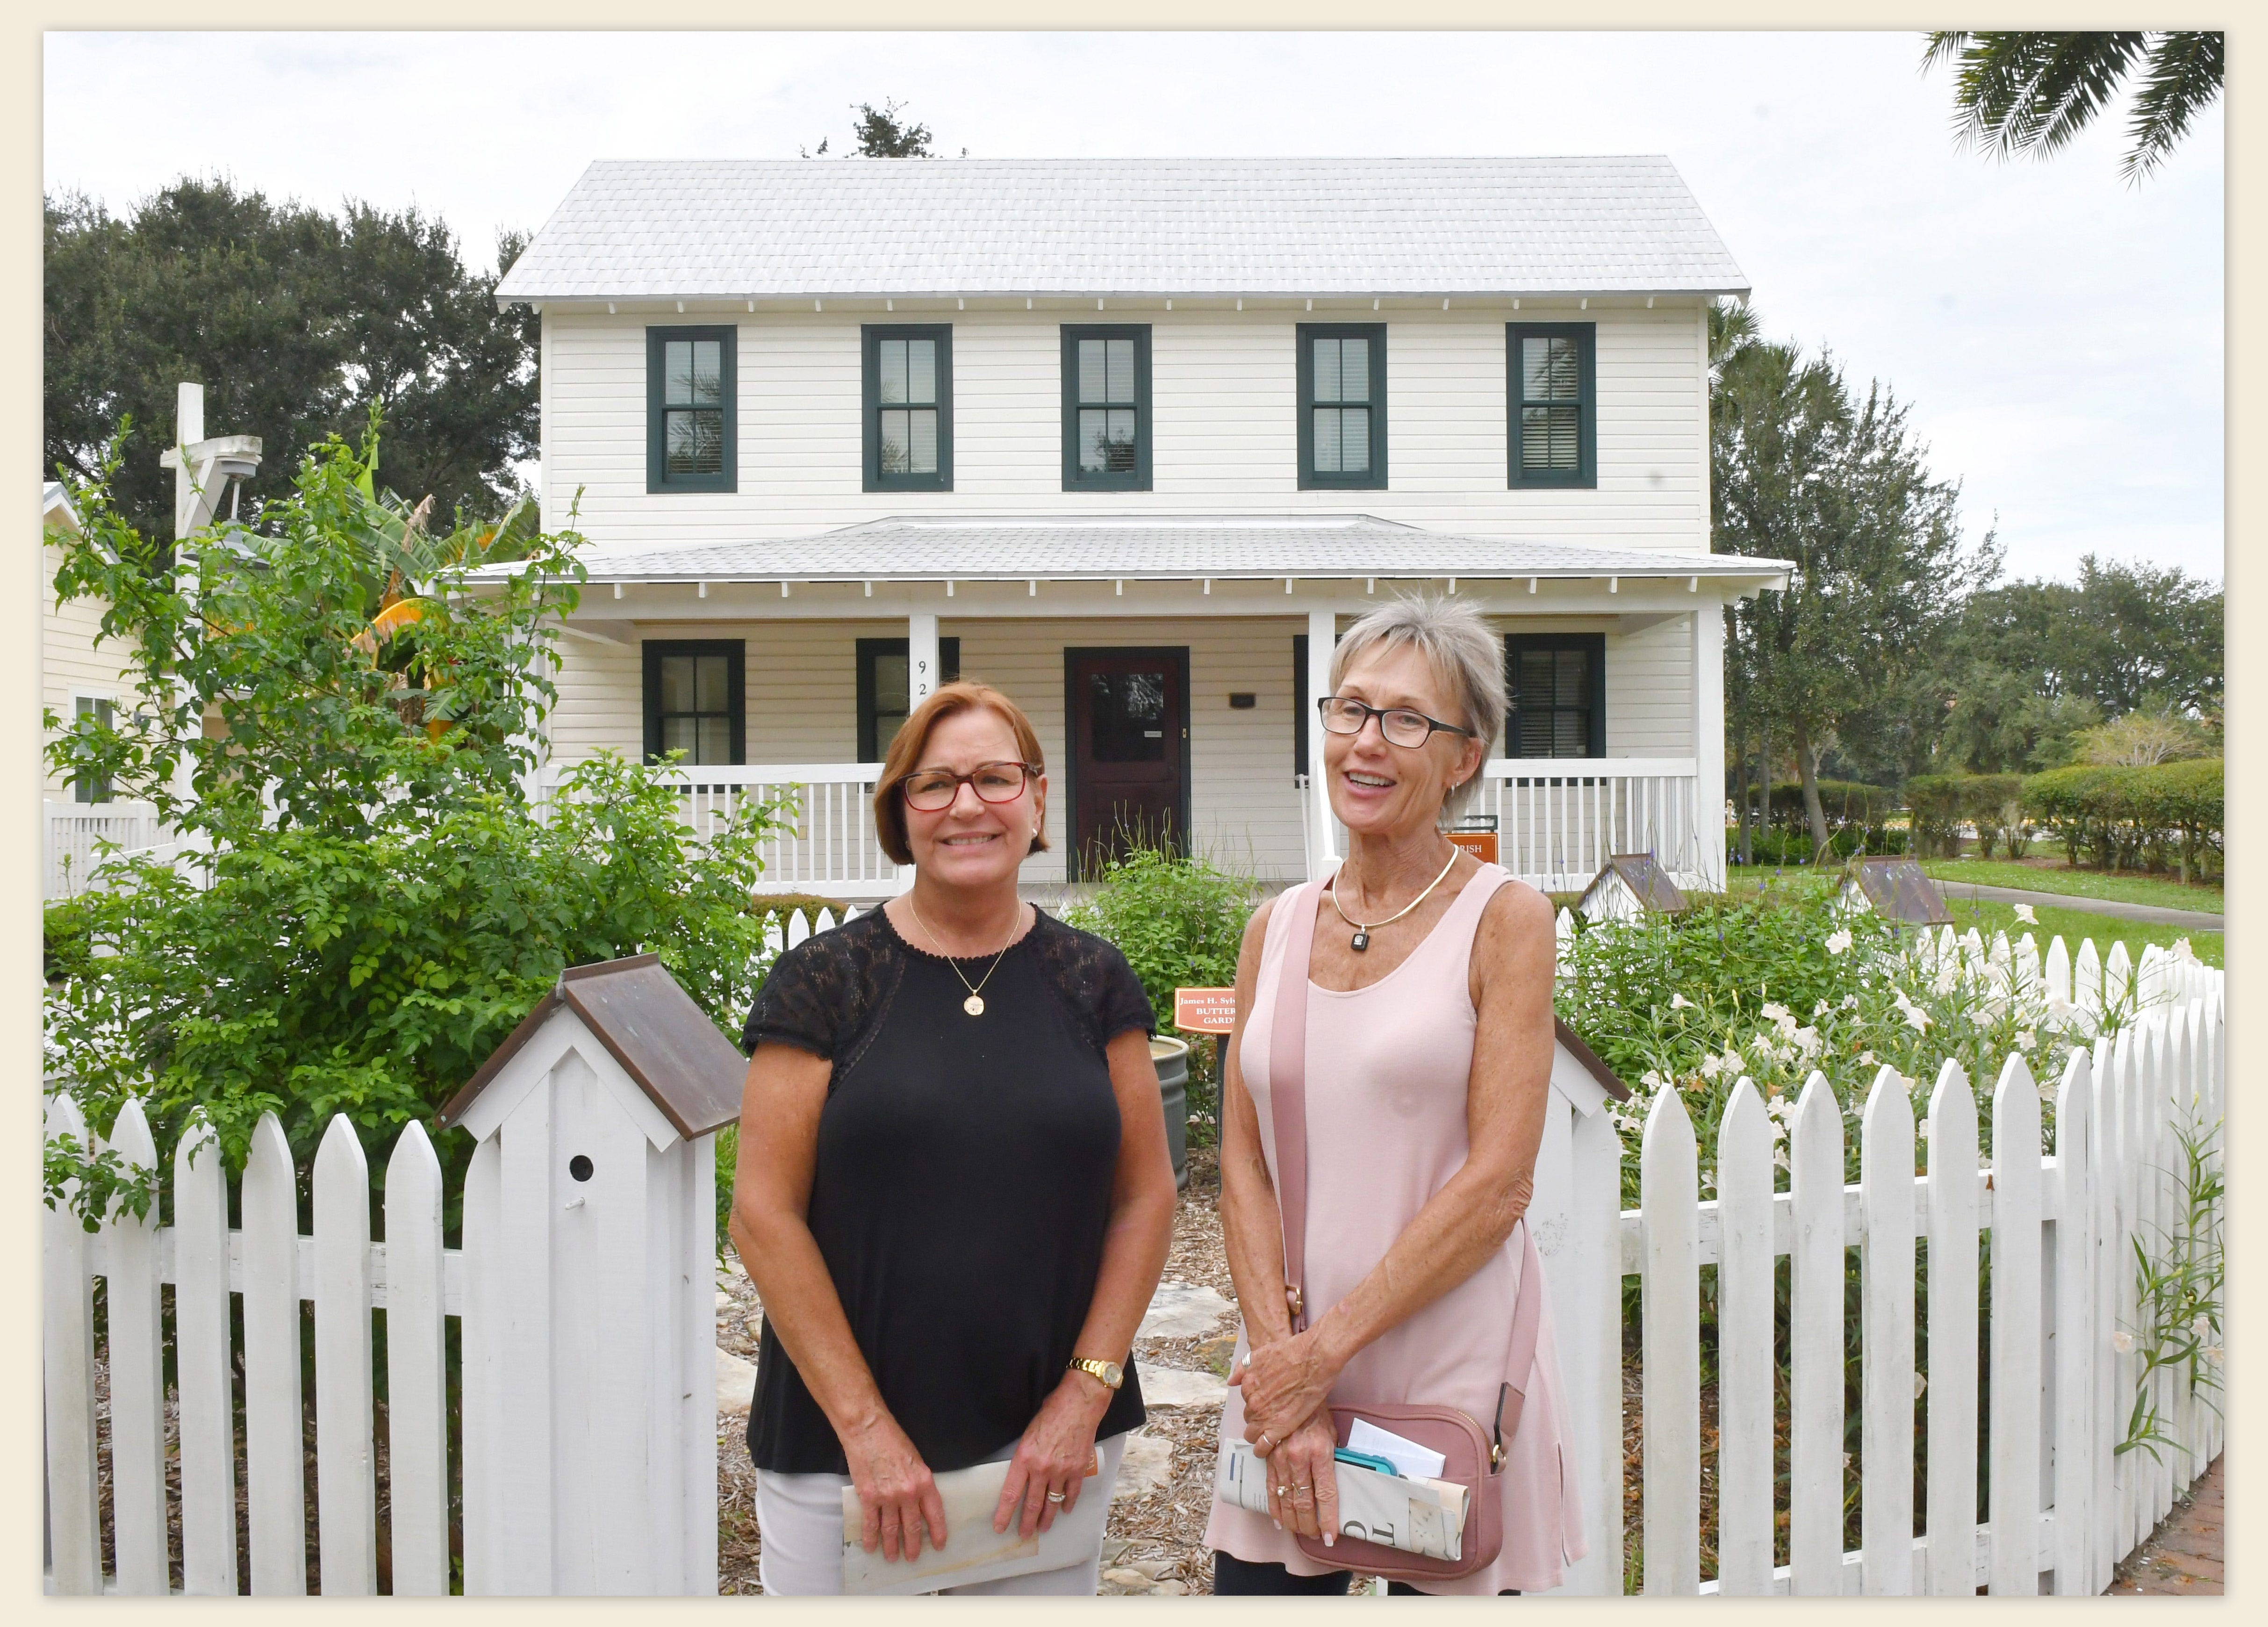 Granddaughters of Hazel Dunn. Jean Fuller is the daughter of Hazel's daughter Elaine, and Donna Rice is the daughter of Hazel's son, Howard. They are standing in front of the Dunn home which was originally along U.S. 1 near S.R. 46, in Mims, and was moved to an area on the south side of Parrish Medical Center several years ago.